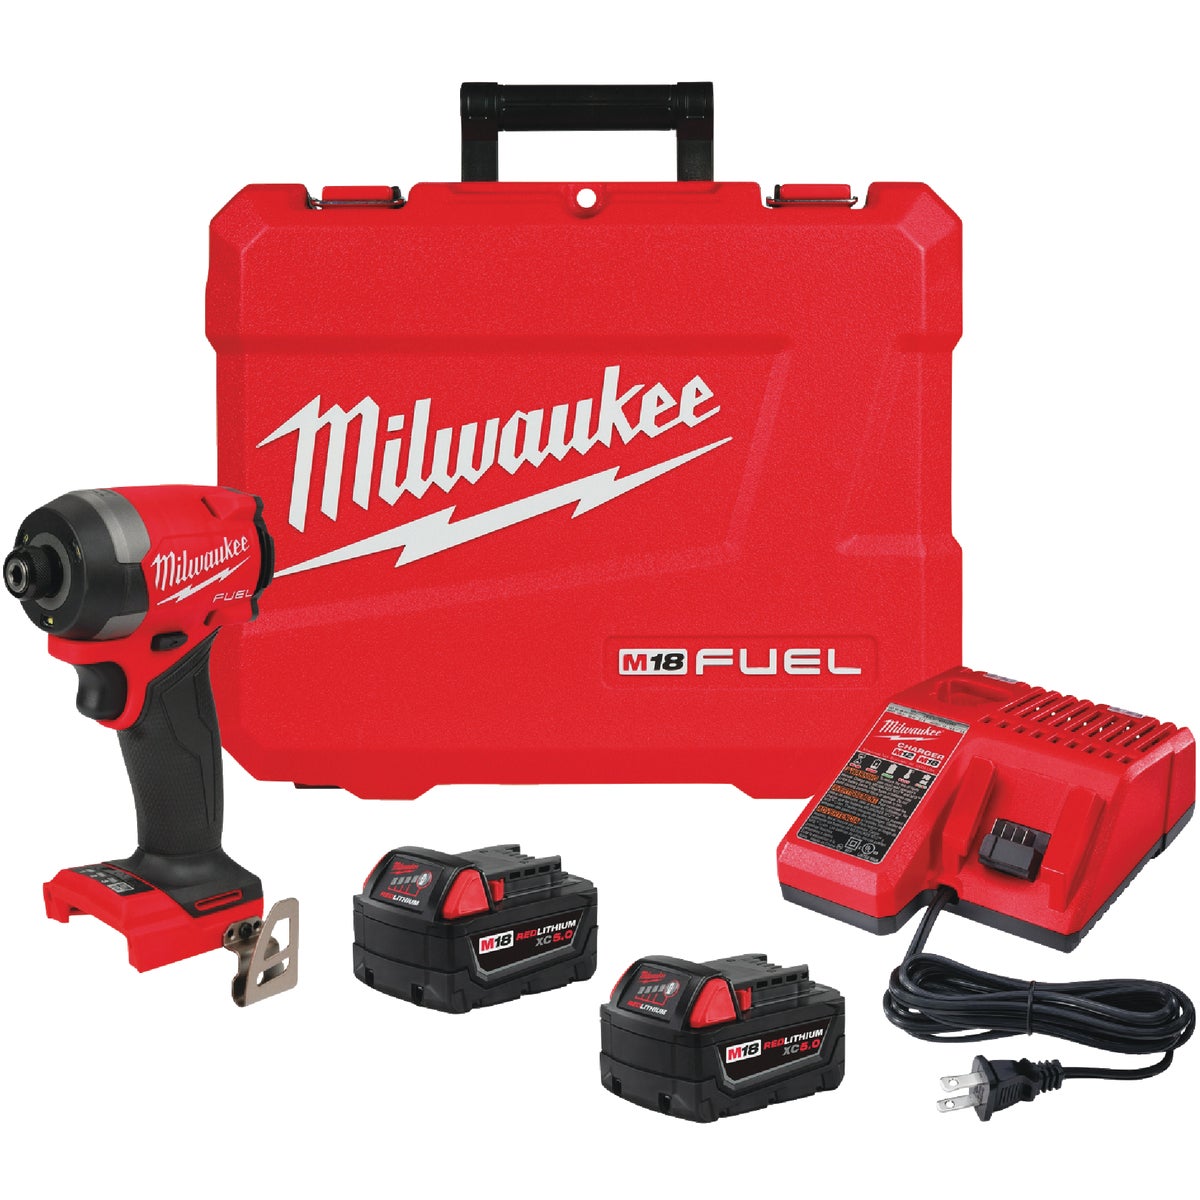 Milwaukee M18 FUEL 18-Volt Lithium-Ion Brushless 1/4 In. Hex Cordless Impact Driver Kit